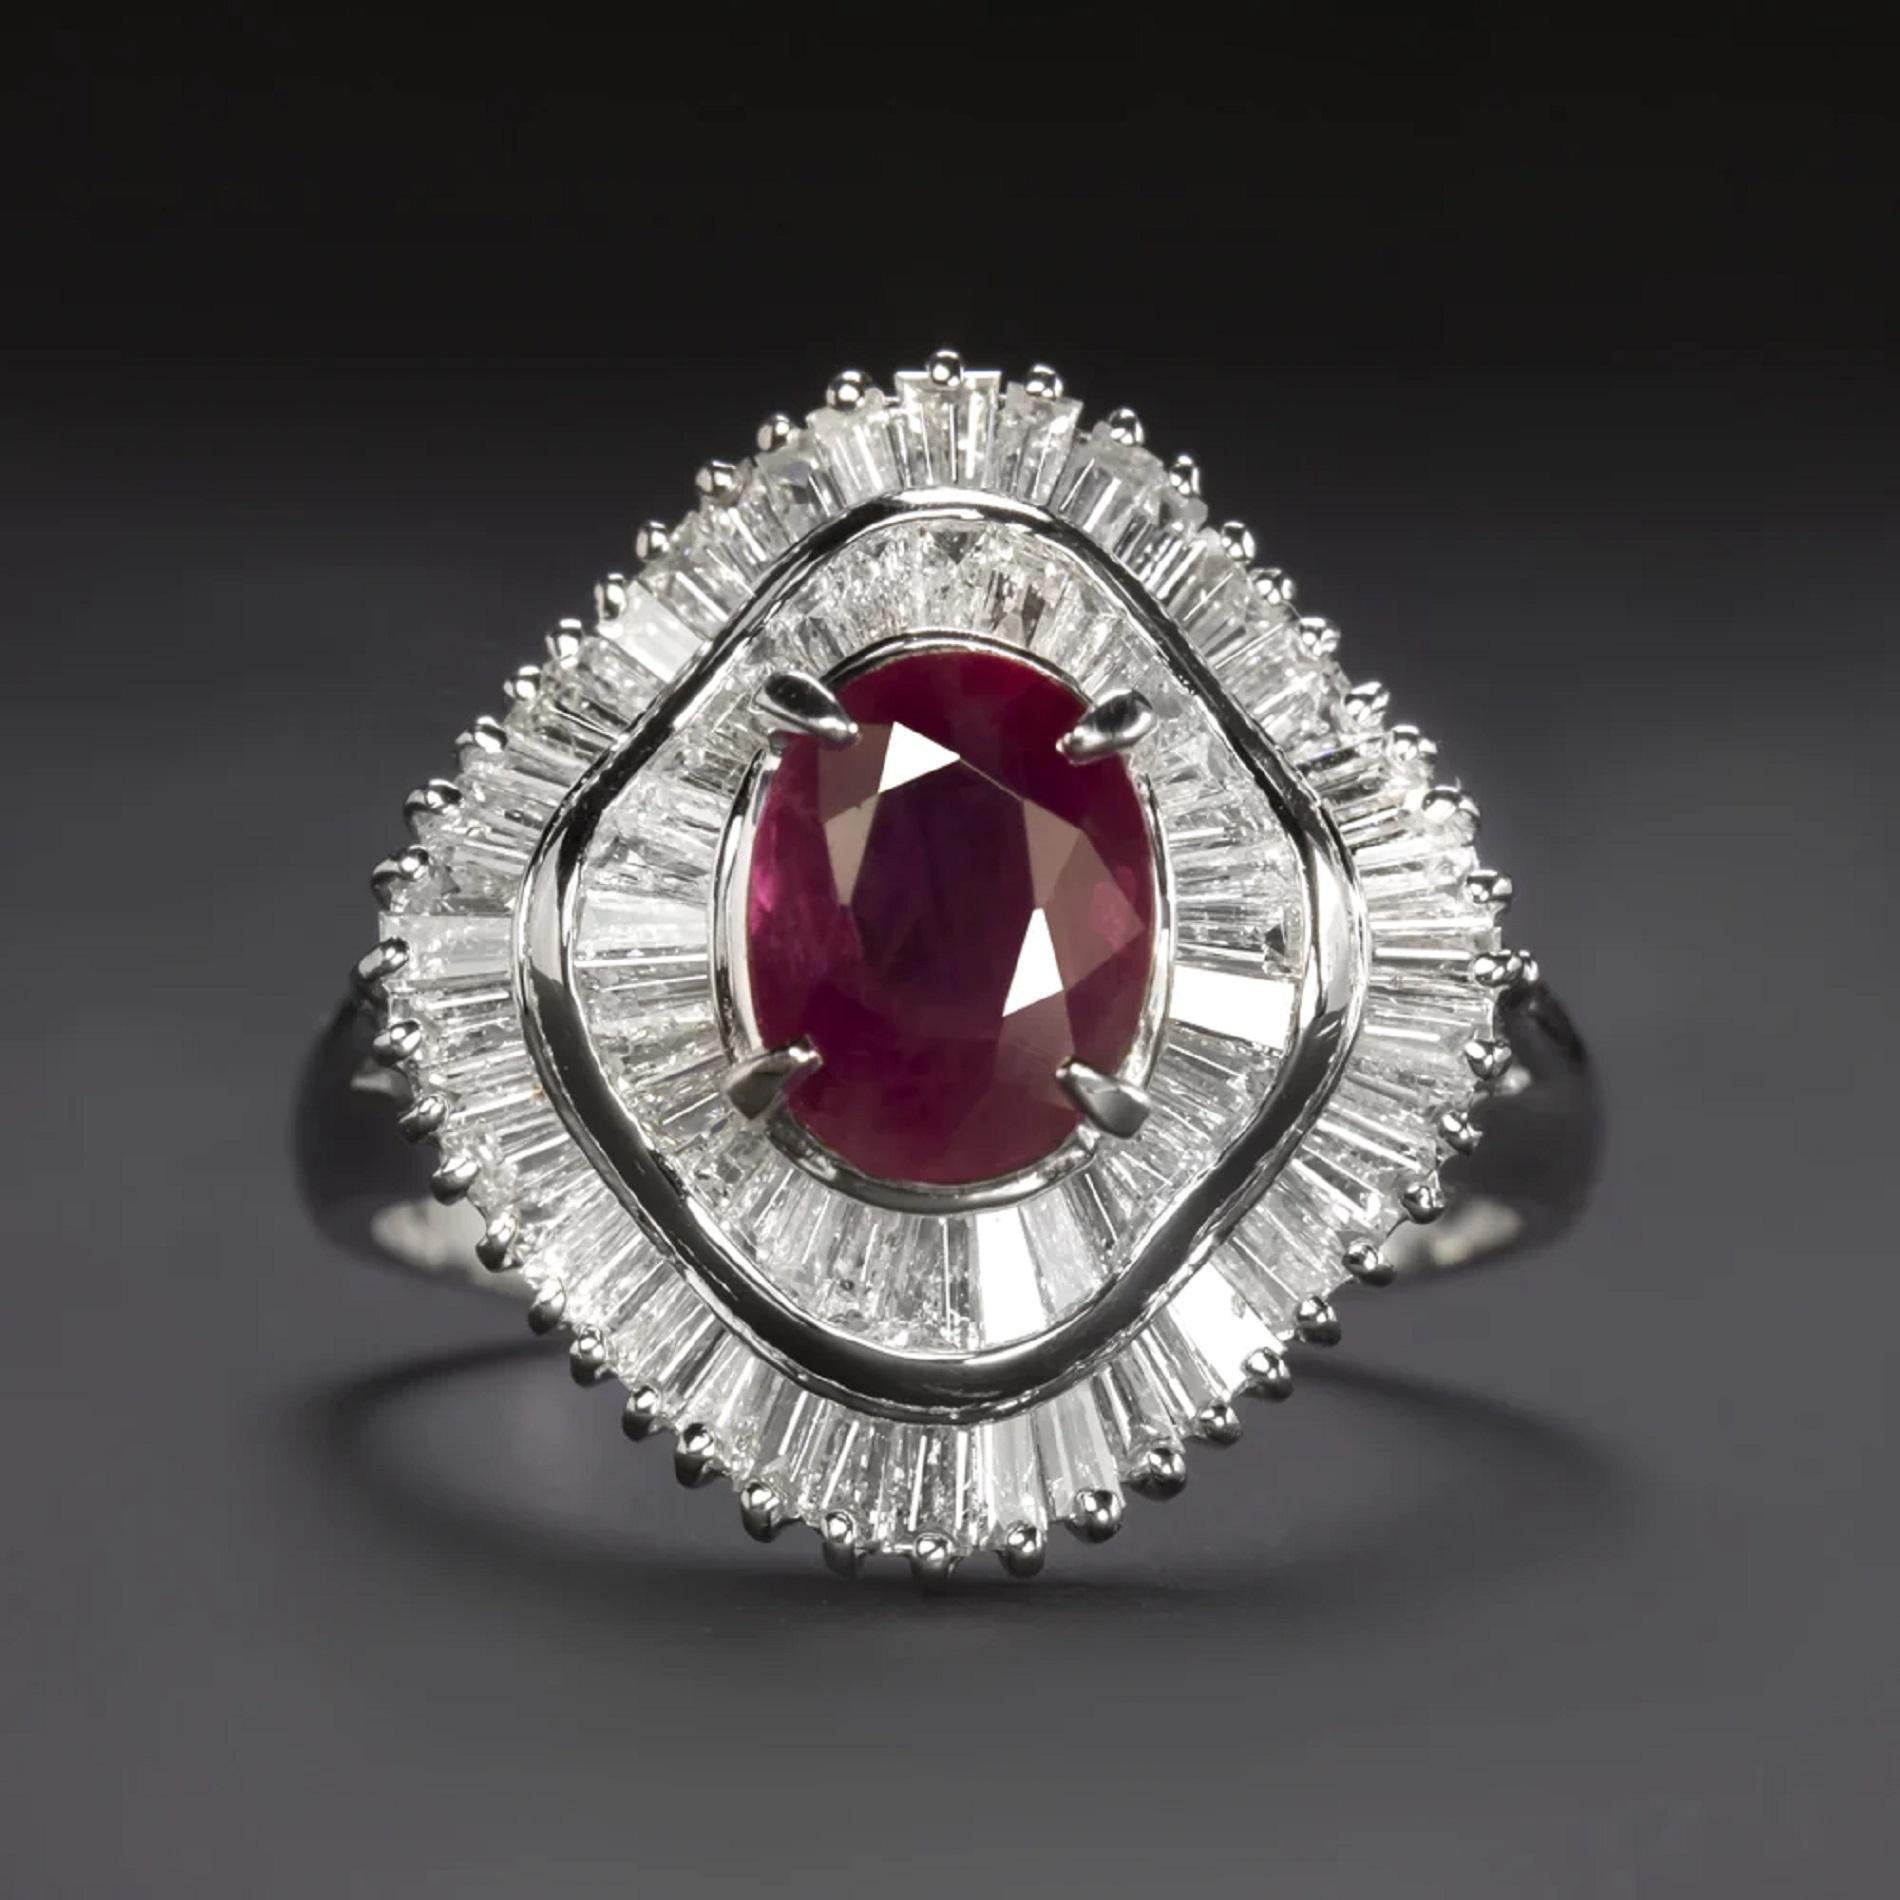  gorgeous cocktail ring has a head turning look with a rich red ruby center and 1.04ct of glittering diamonds set in a cascading ballerina design! Overall this is a high quality piece with GIA certification, a high quality ruby center, substantial